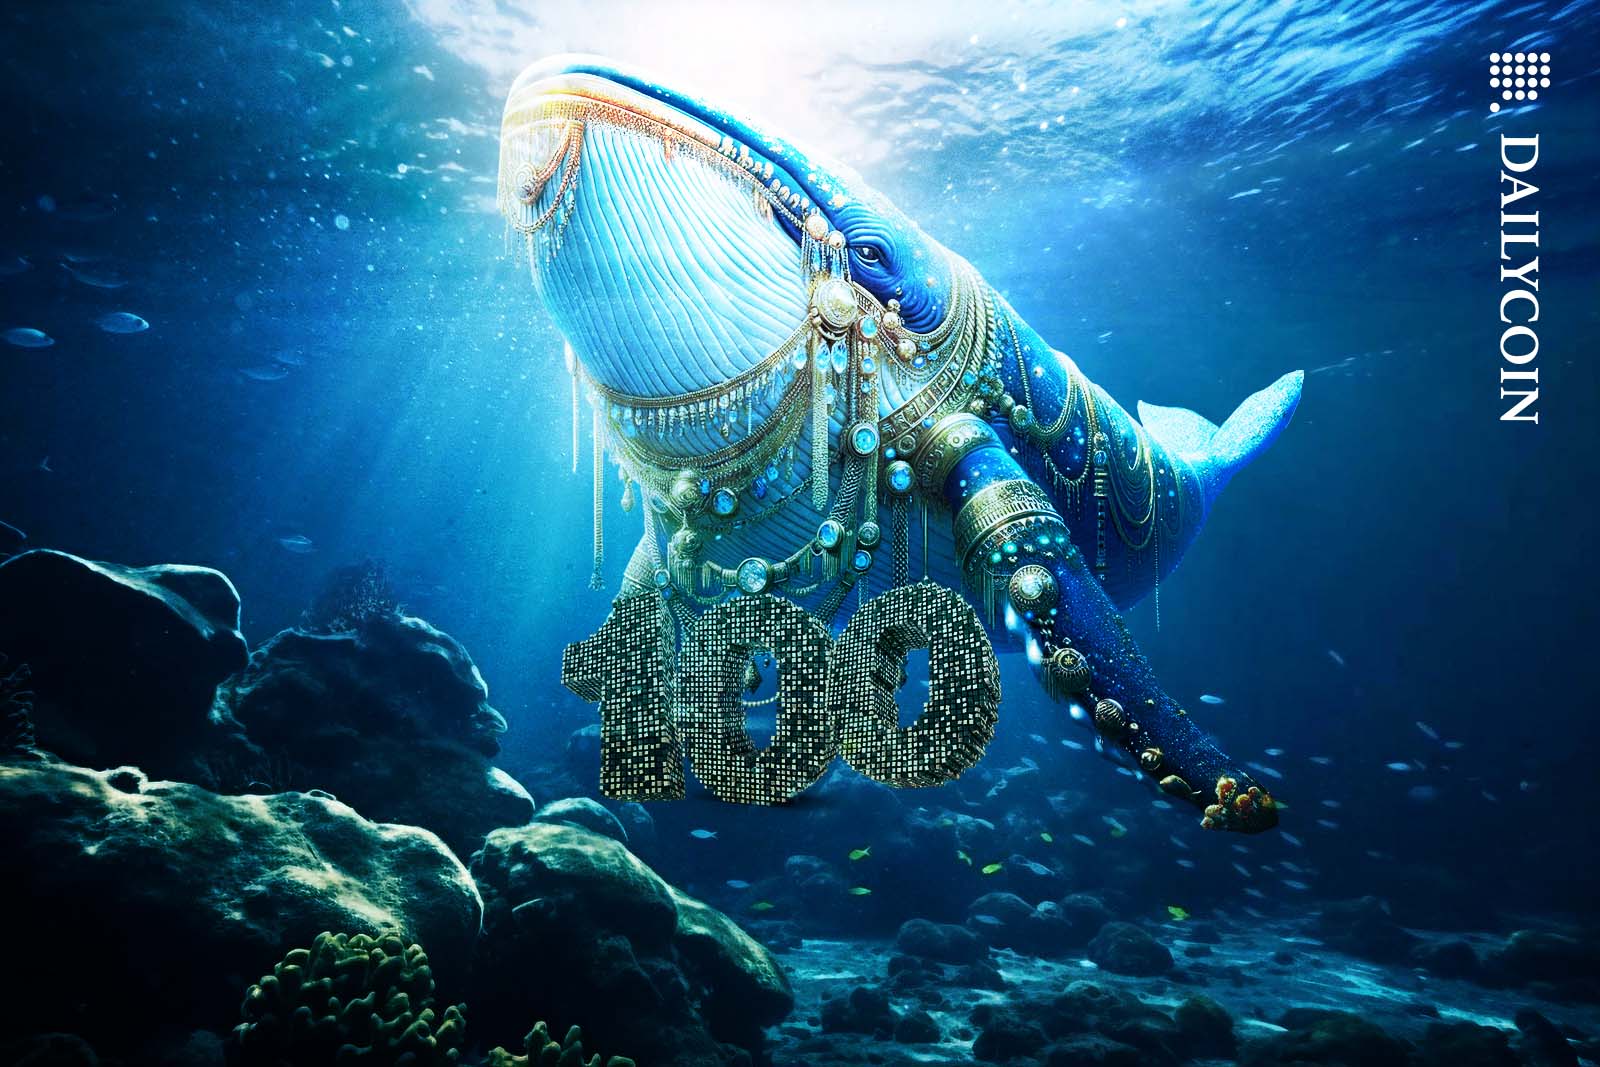 A whale under water, wearing lots of jewellery including a huge "100" pendant.